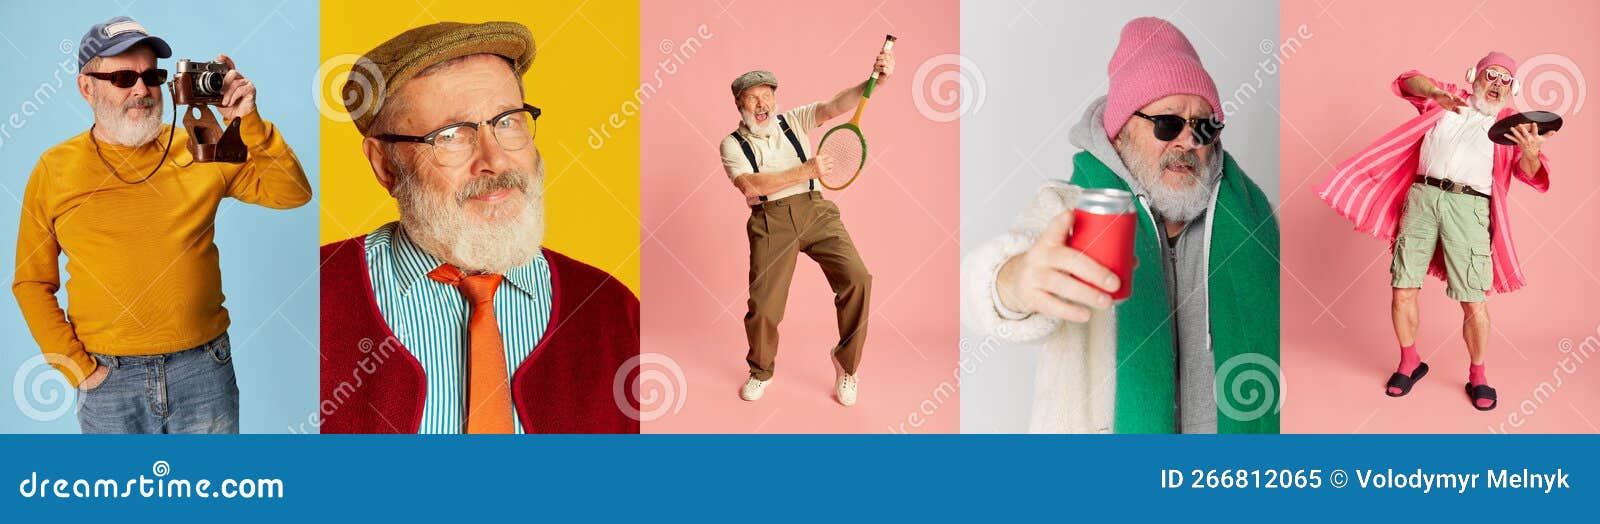 collage. portraits of emotional, stylish senior man posing in different clothes over multicolored background. modern